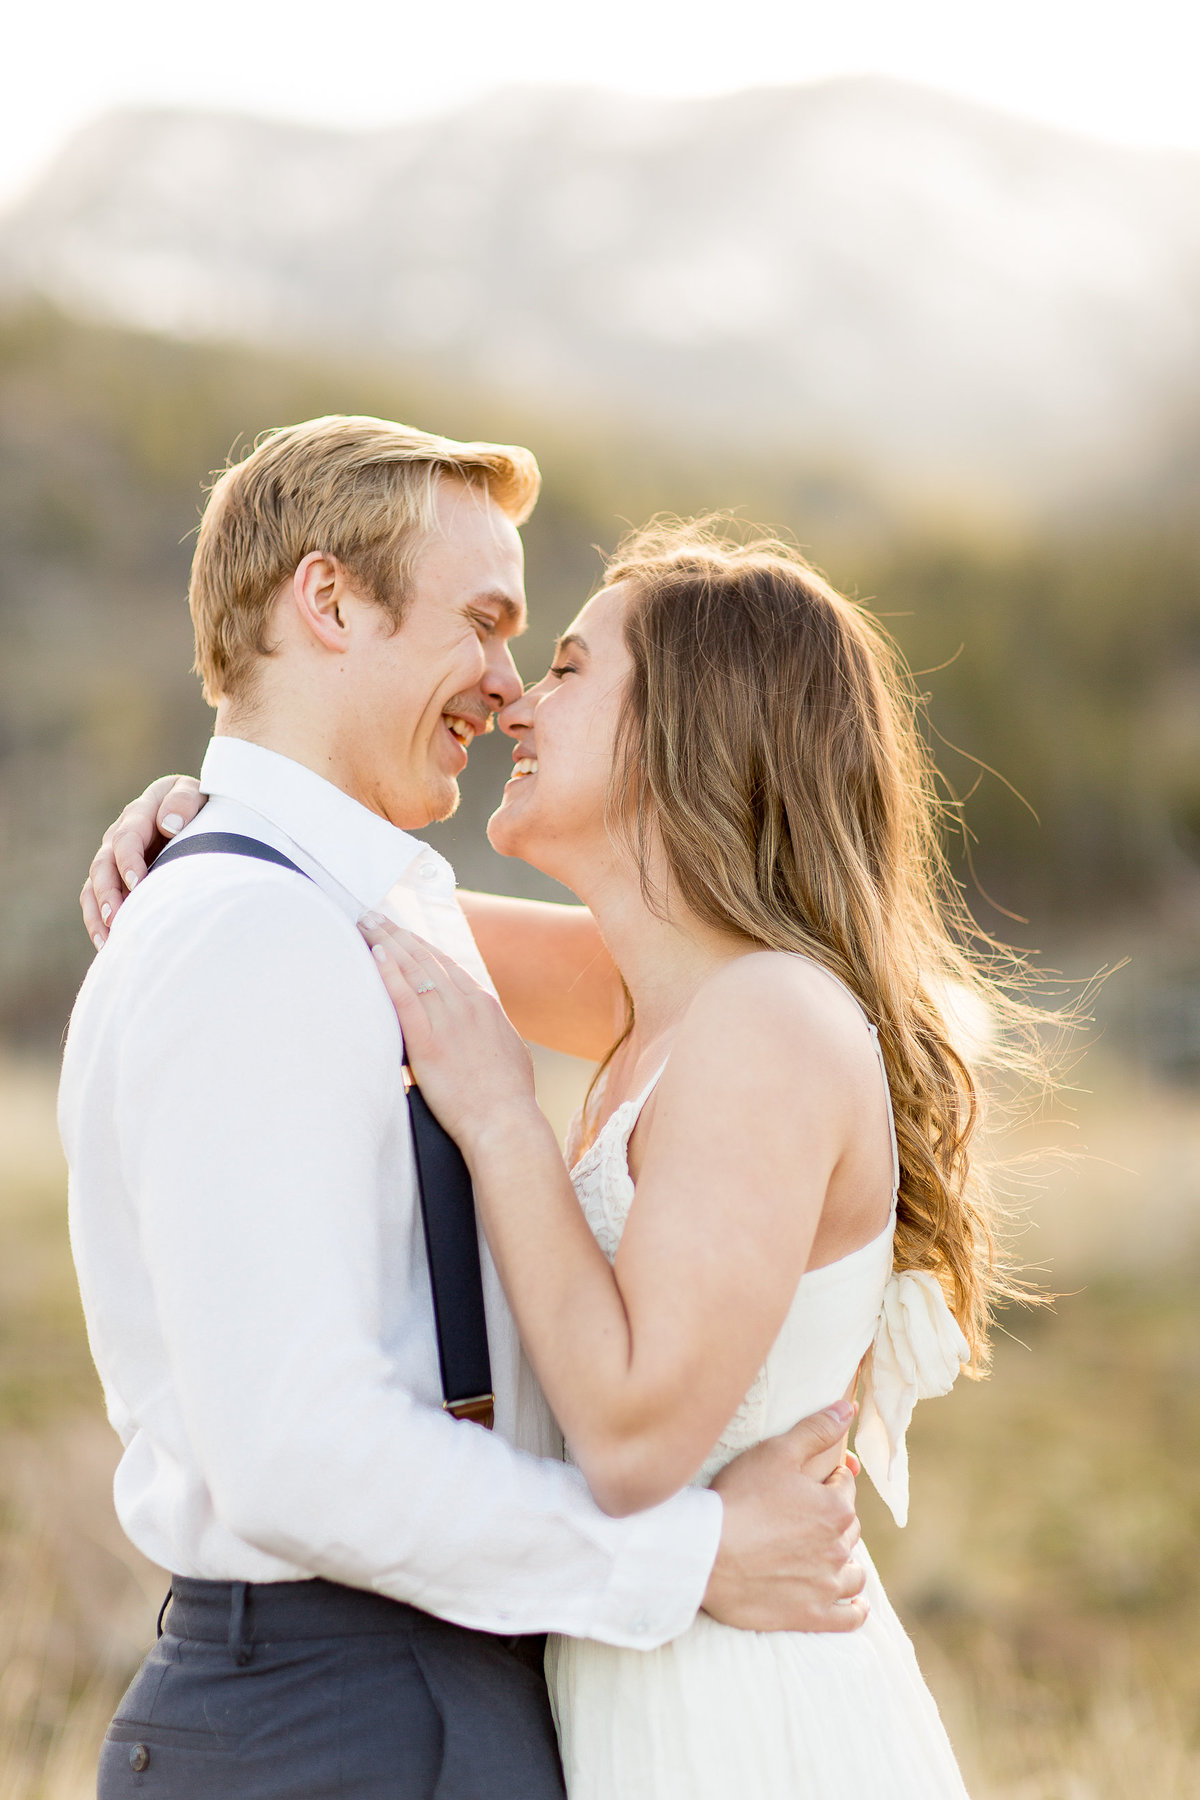 Henry & Kyrie | Previews | Emily Moller Photography (5 of 6)